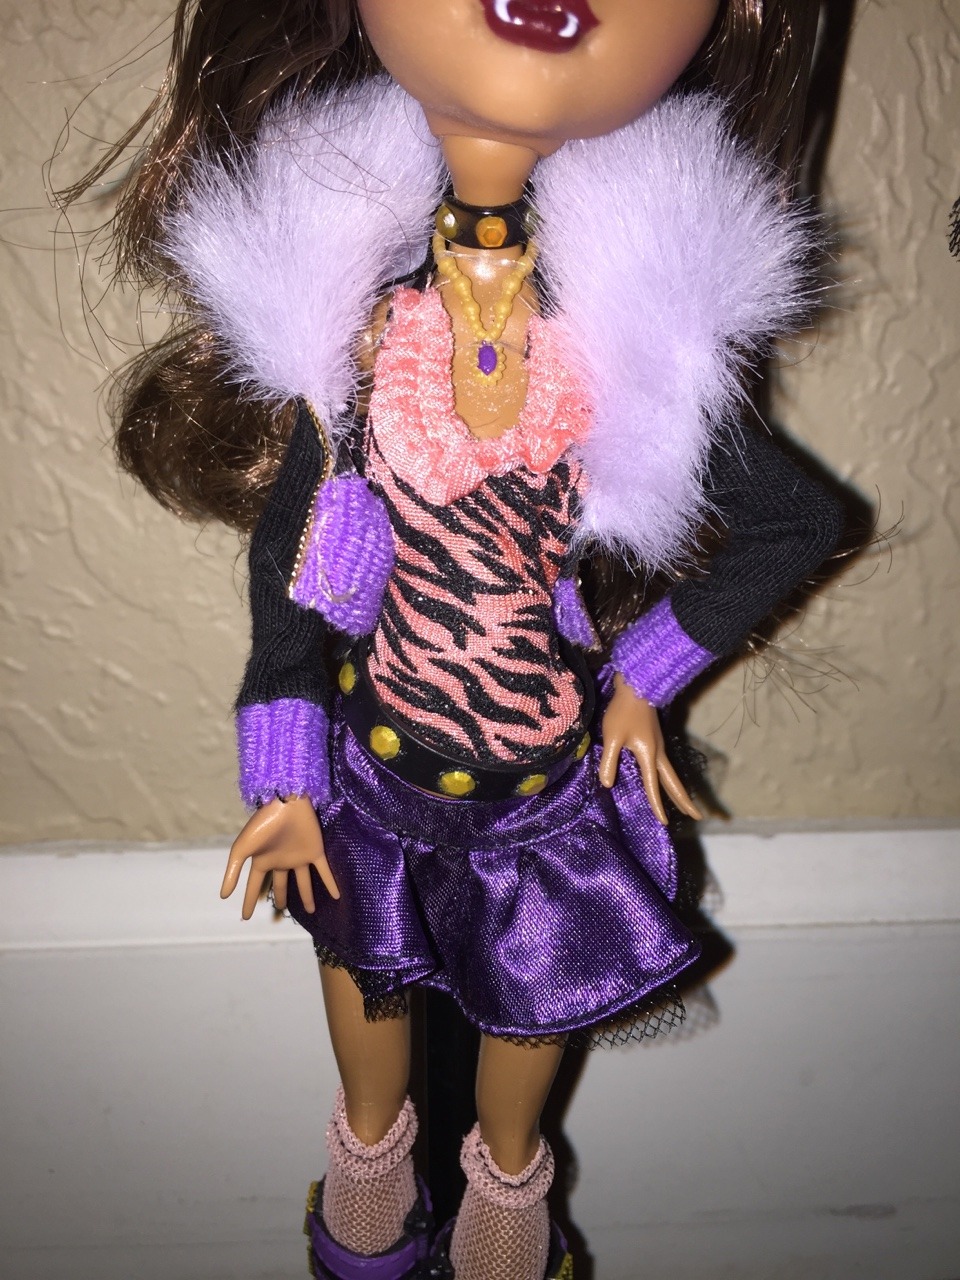 sailorevermonster:

Clawdeen Wolf Frightfully Tall and First Release Clawdeen comparison.